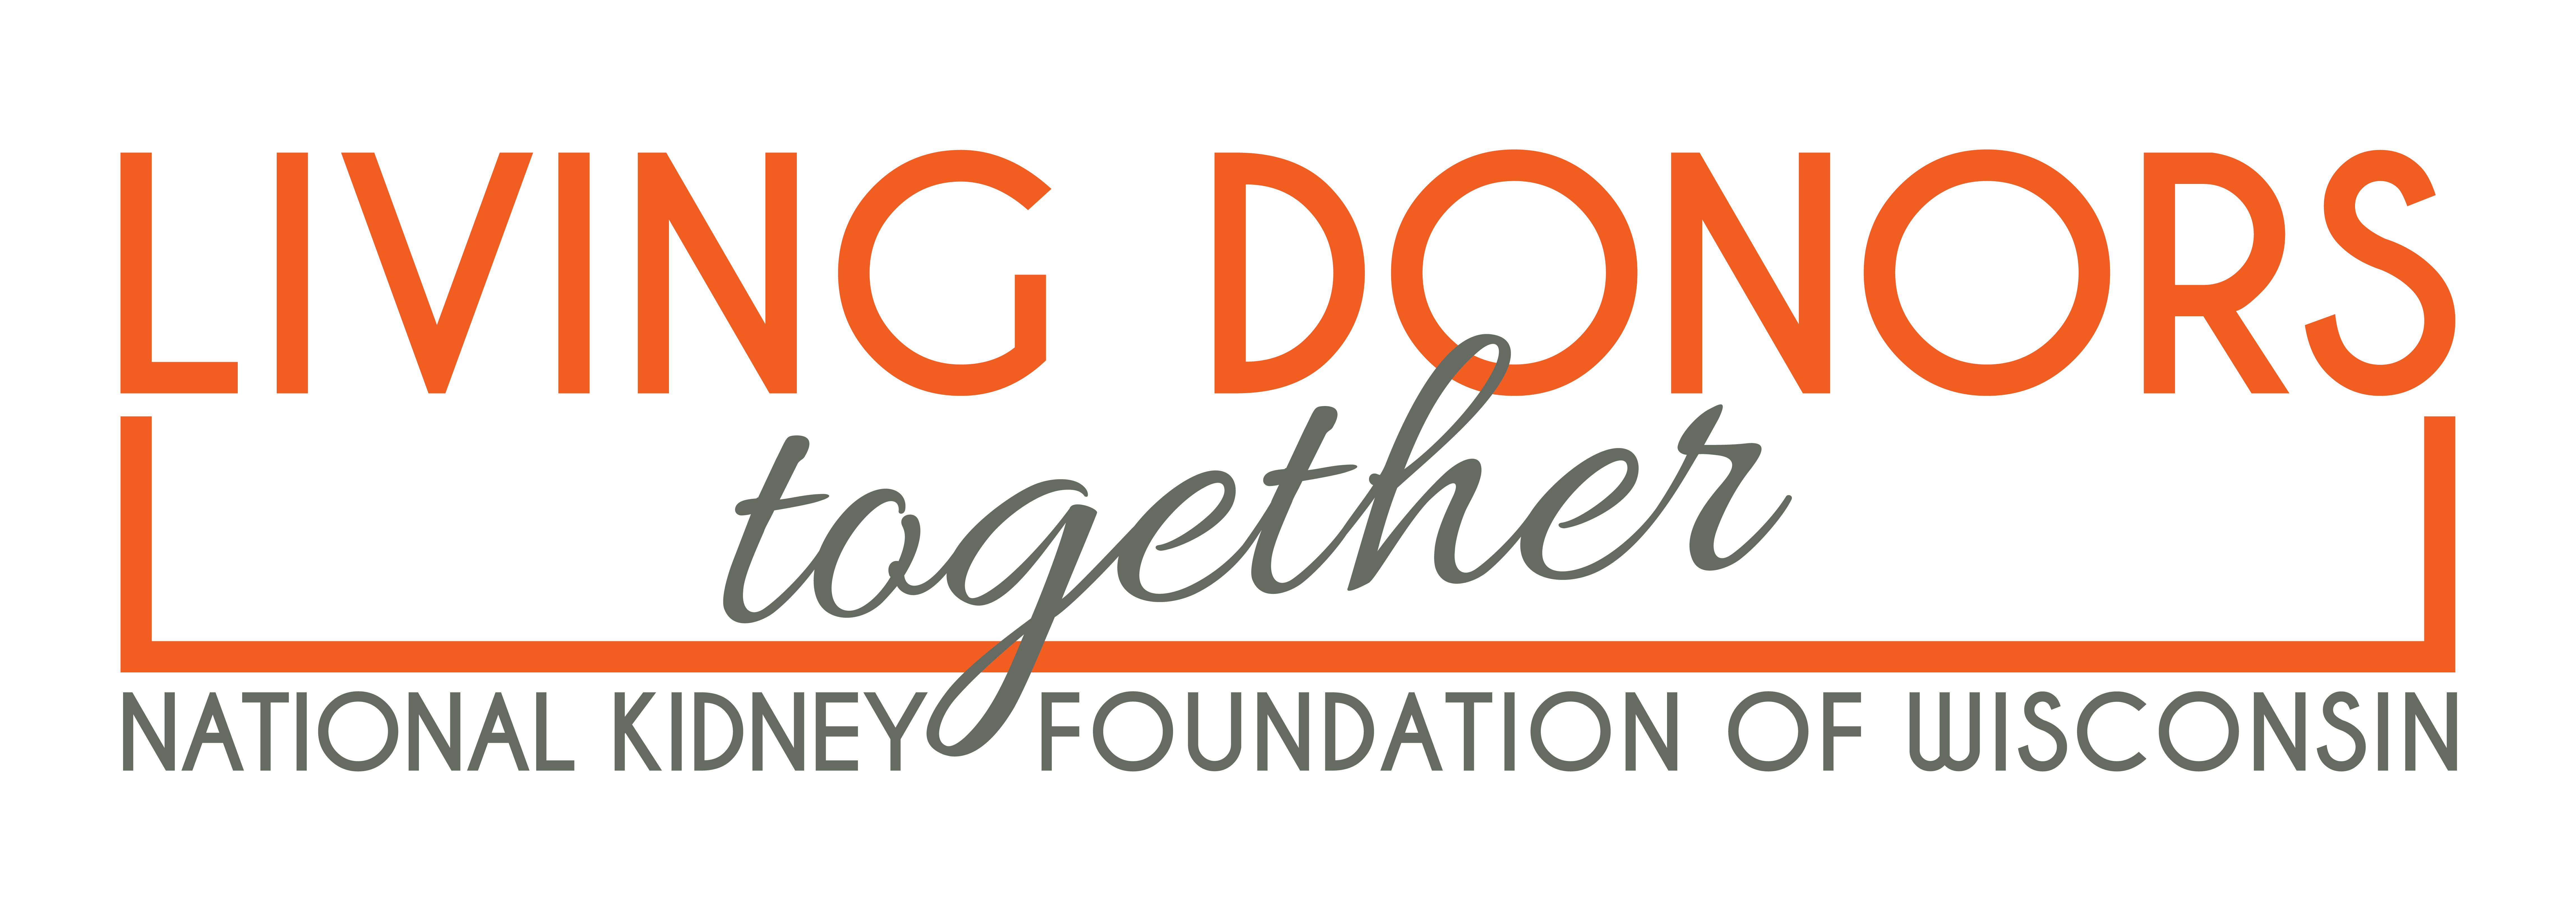 Living Donors Together National Kidney Foundation of Wisconsin